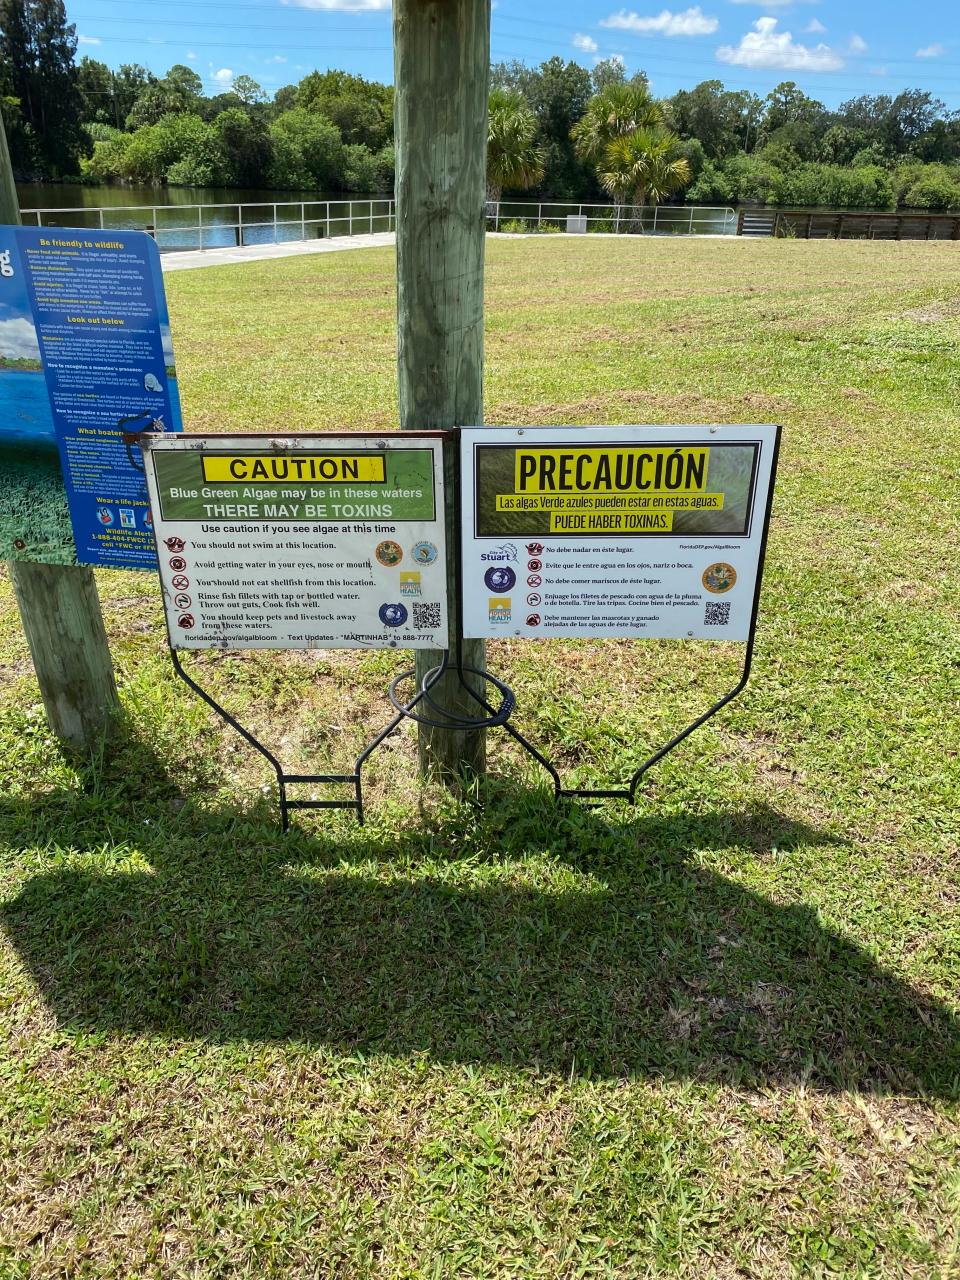 The Florida Department of Health office in Martin County put up toxic algae warning signs in English and Spanish at Timer Powers Park in Indiantown on Monday, Aug. 7, 2023.